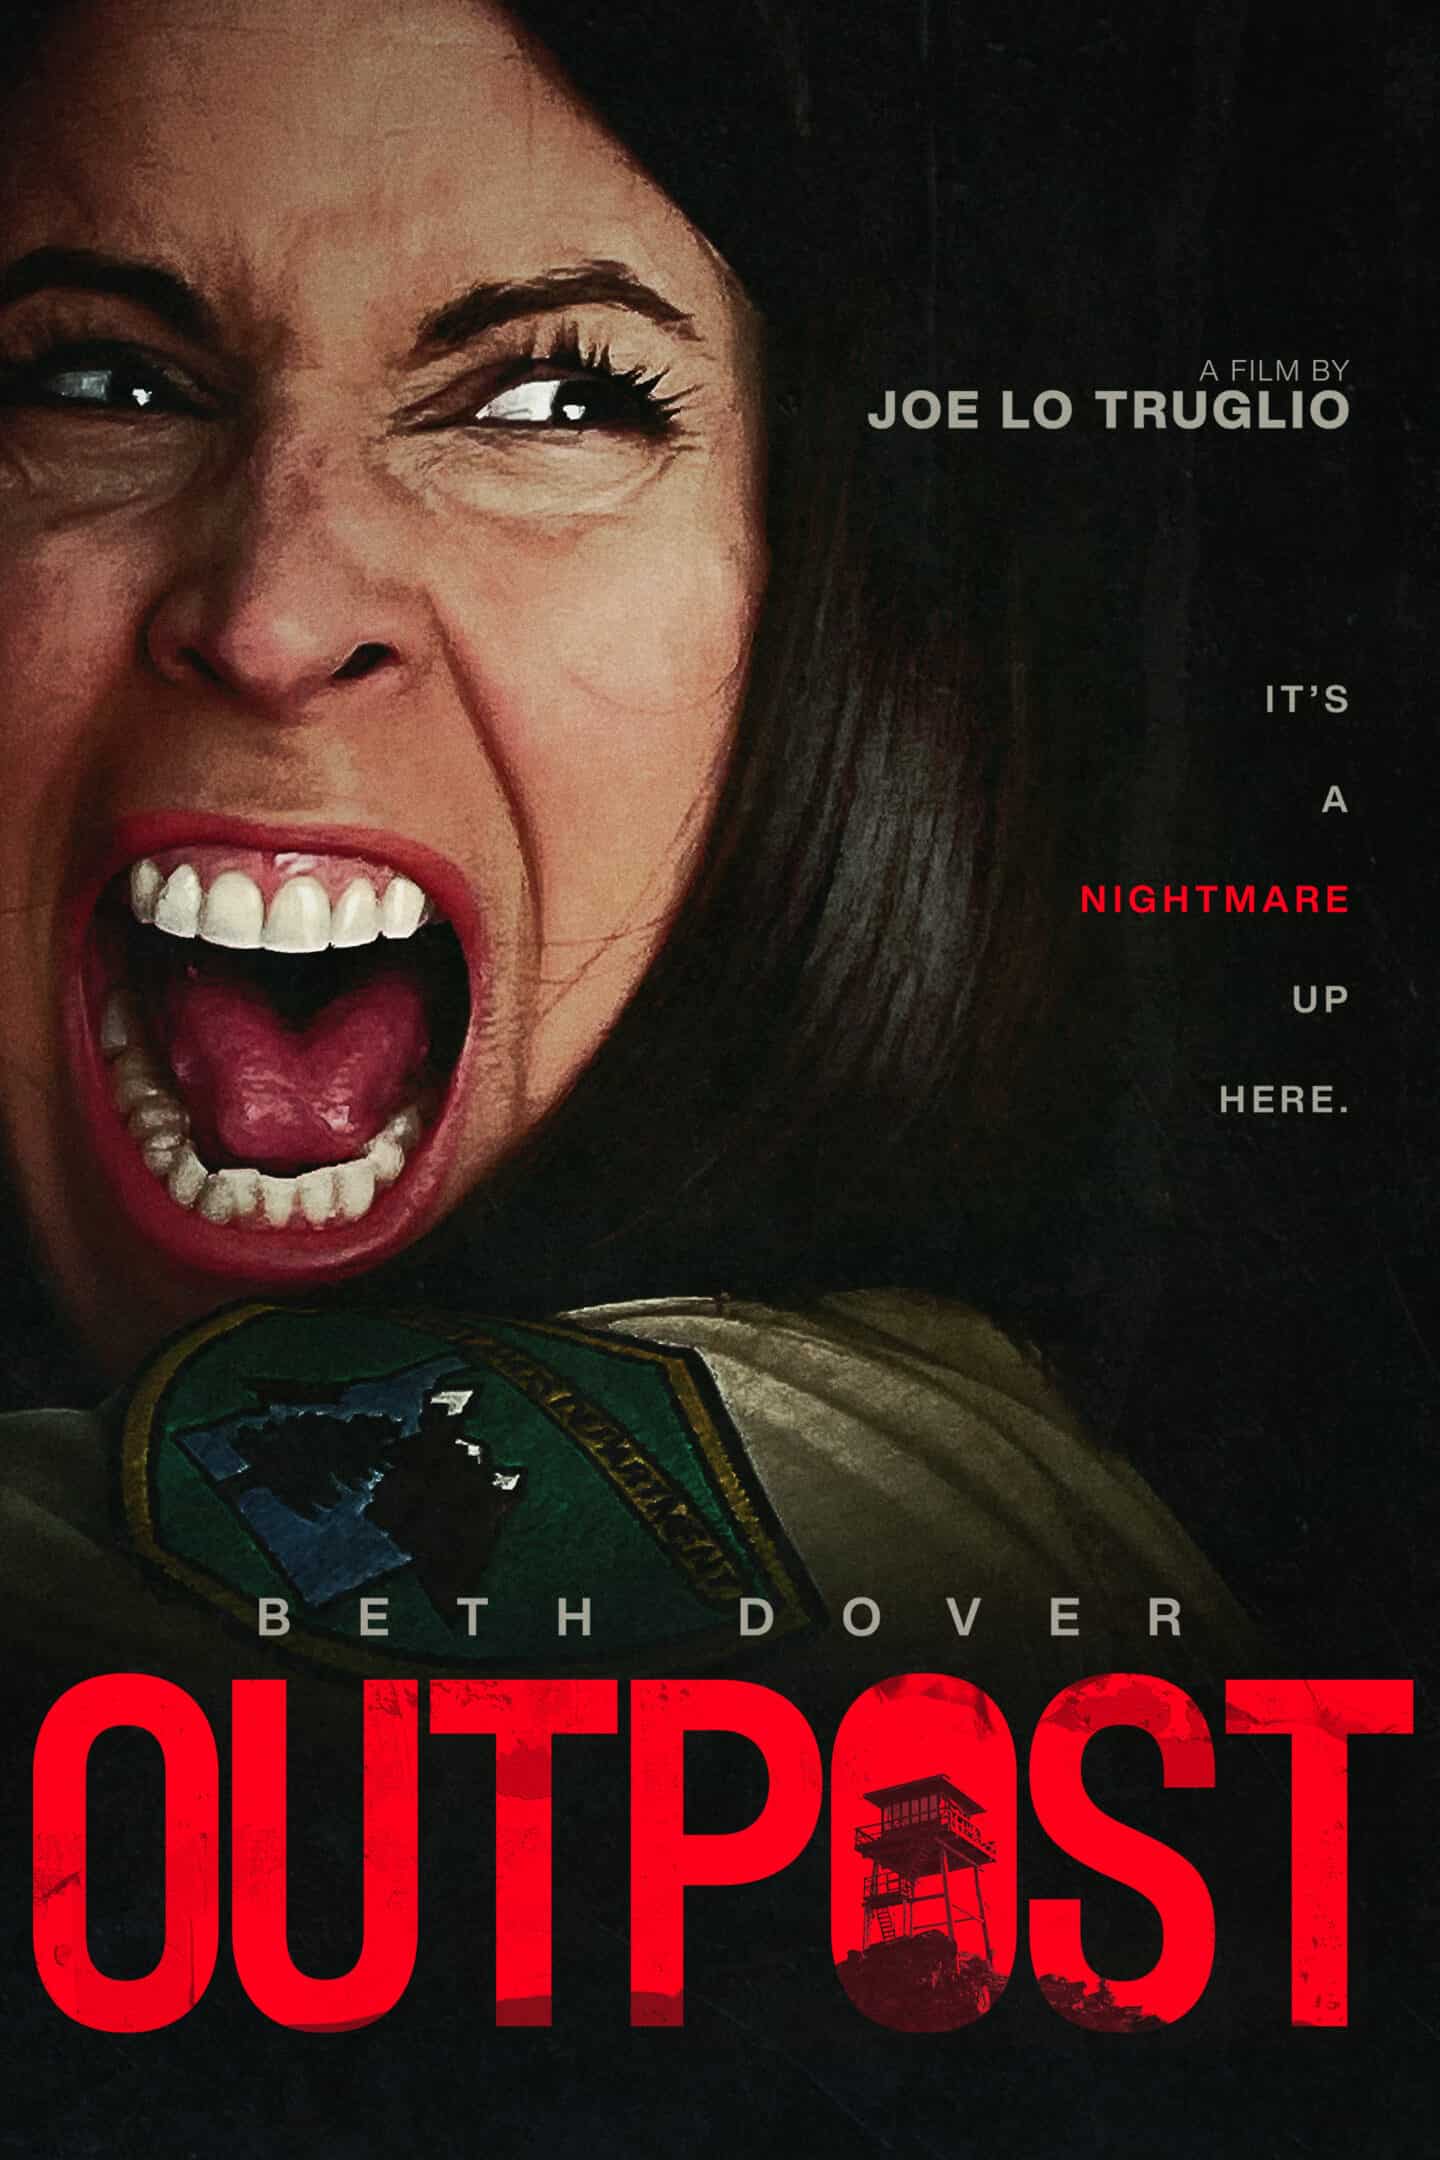 Outpost: A Gripping Thriller of Survival and Redemption hits theaters on May 19th 1